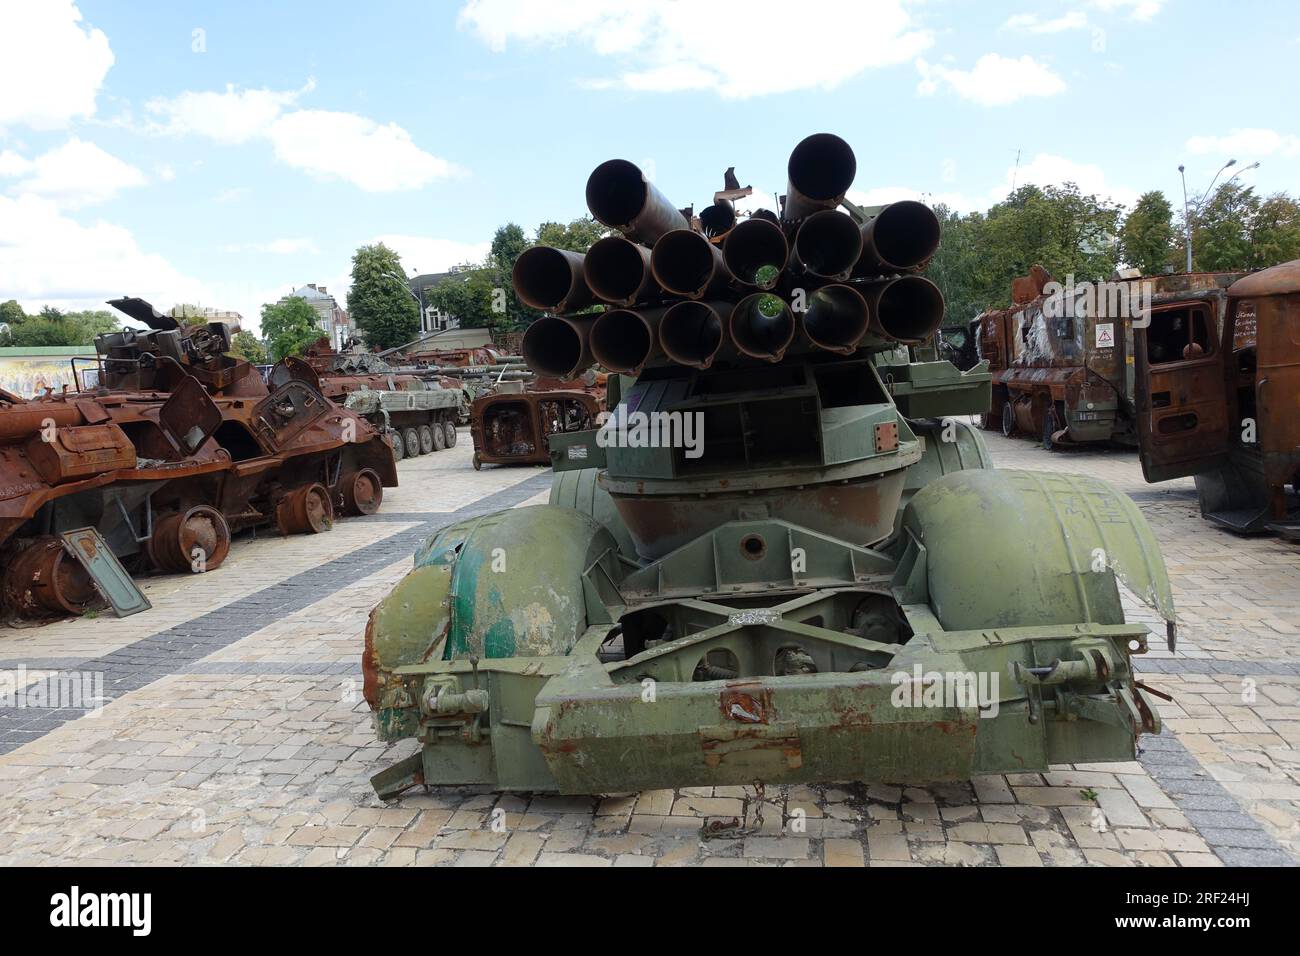 Destroyed Russian army armored vehicles are displayed in a square in central kyiv, Ukraine Stock Photo